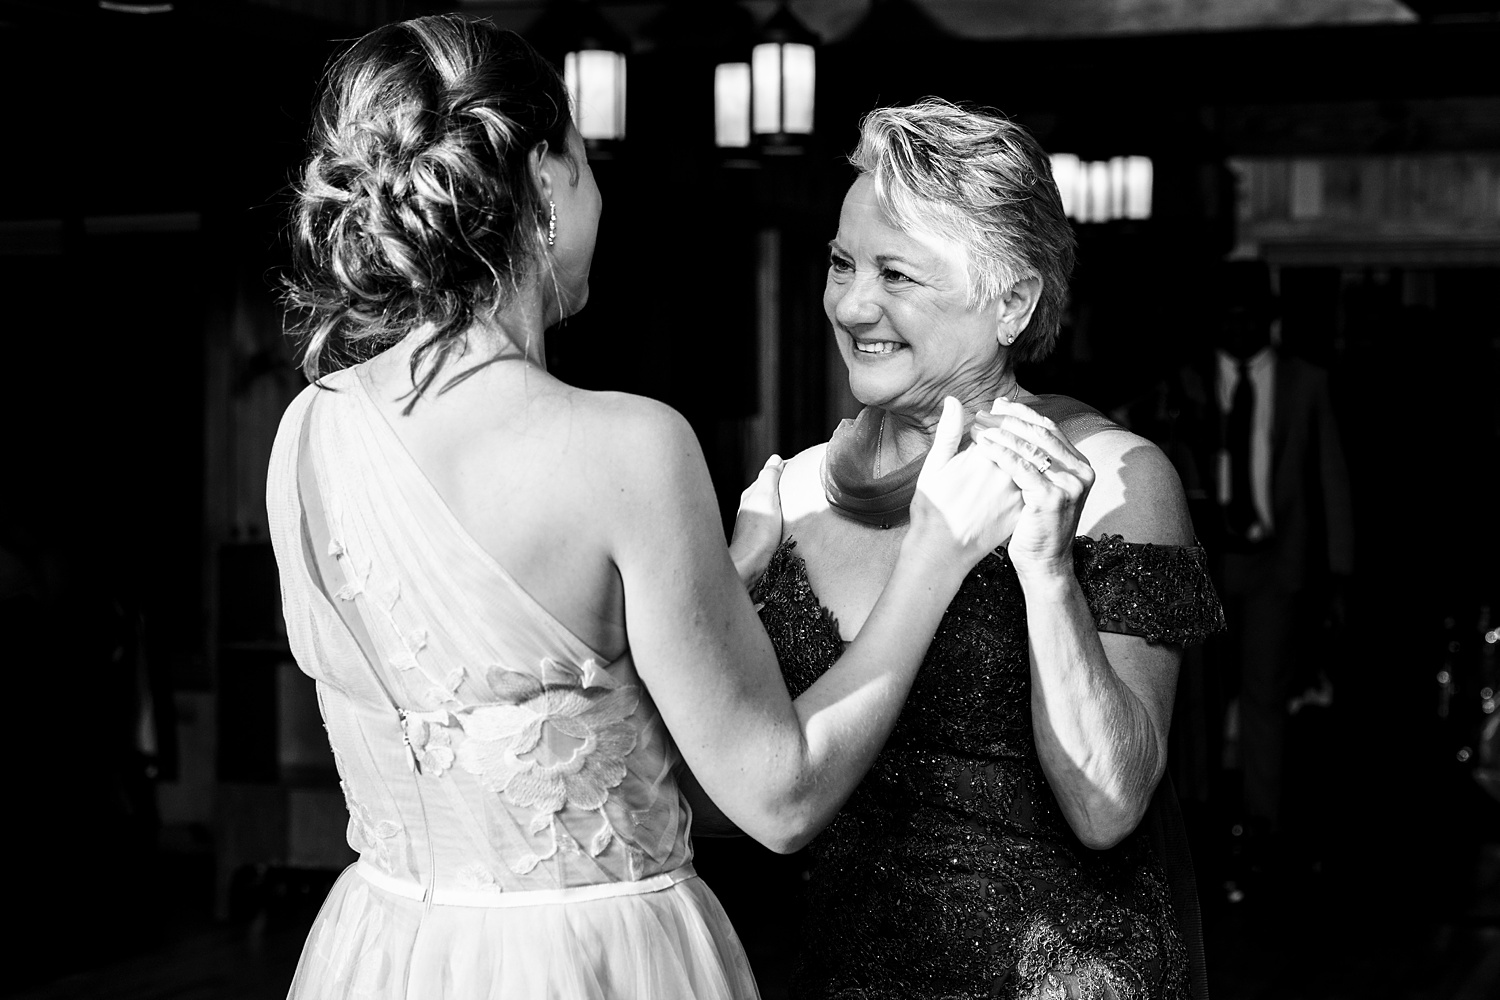 The bride dances with her mom at the wedding day